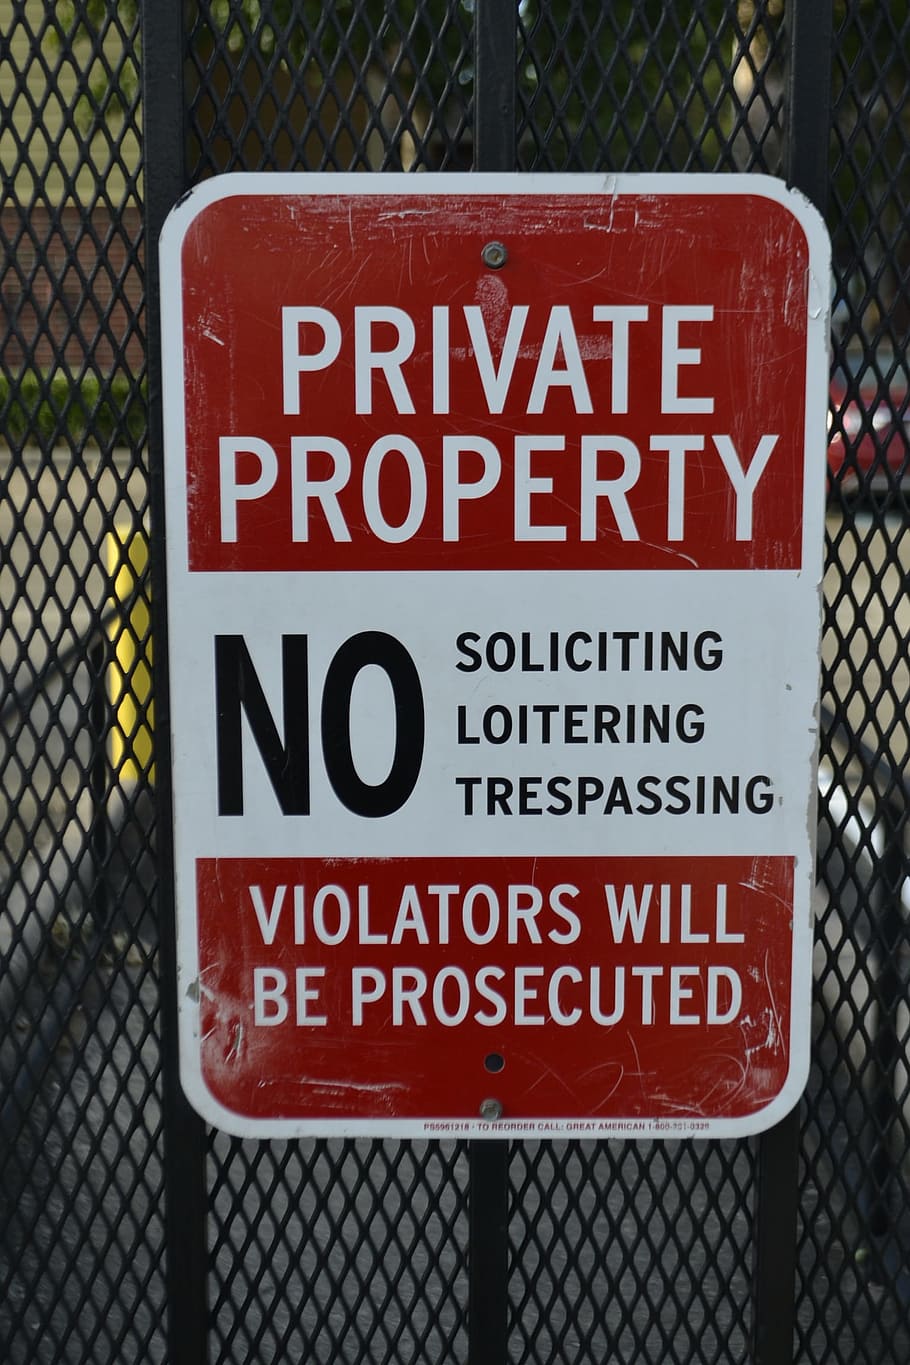 brown, white, private, property signage, black, metal fence, private property sign, no trespassing, violators, prosecuted